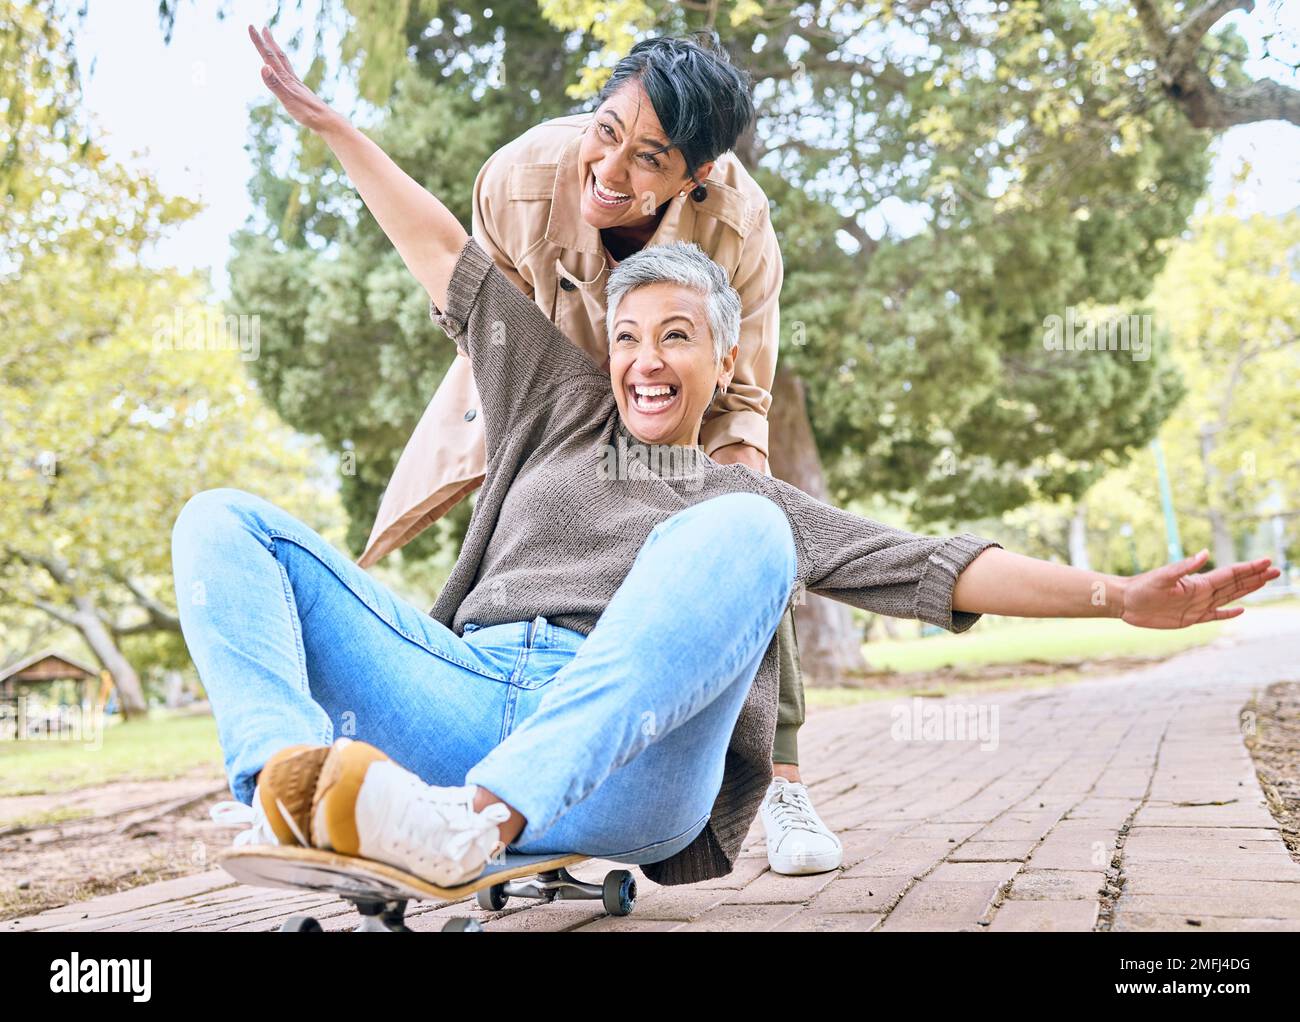 Senior women, park and couple of friends together outdoor for comic fun on a skateboard while happy. People together in nature for bonding, happiness Stock Photo